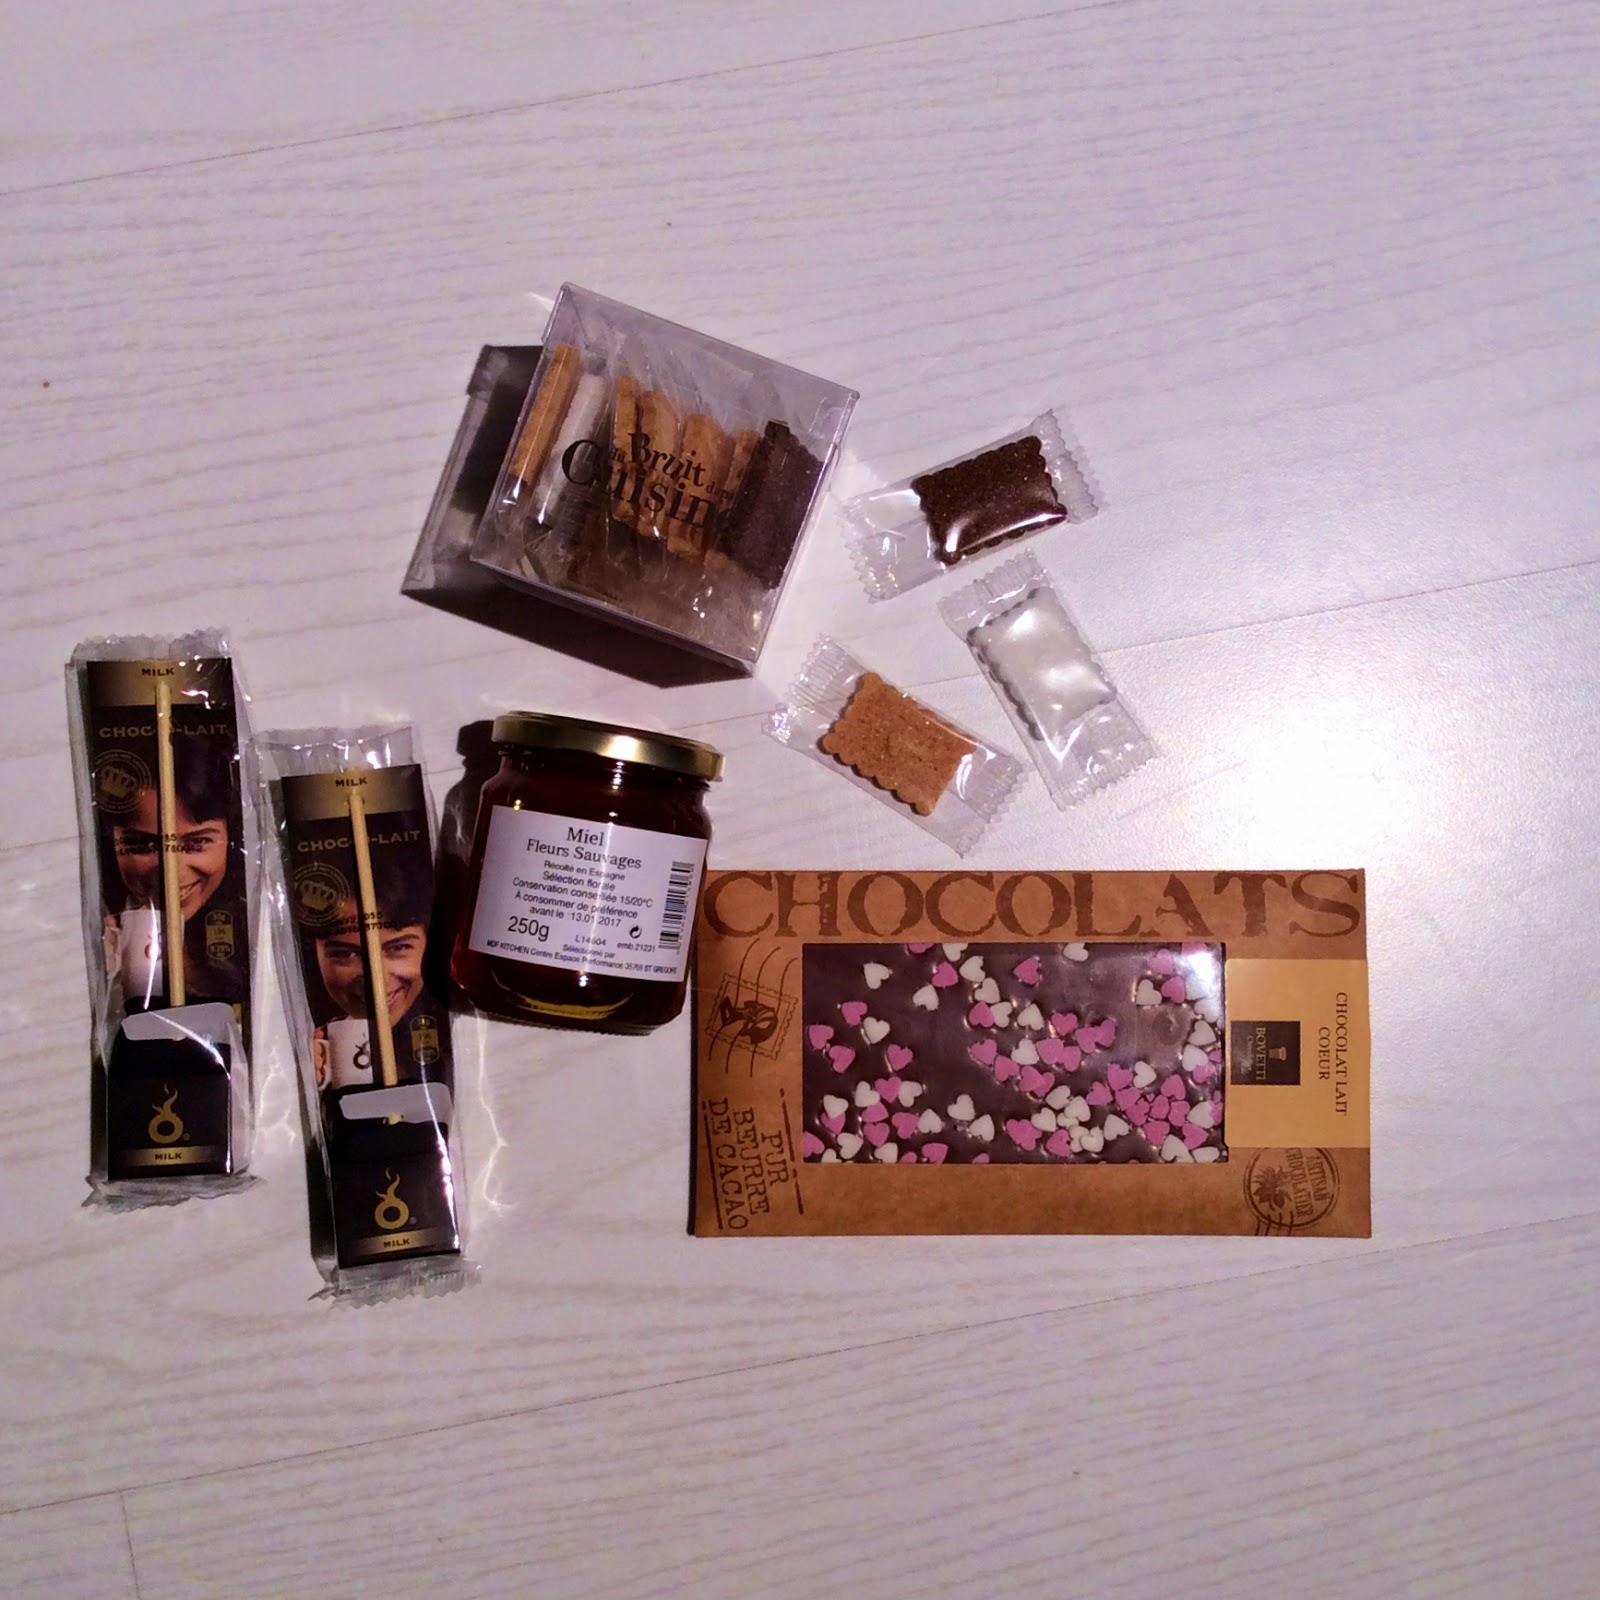 http://www.globeshoppeuse.com/2015/02/mon-shopping-gourmand-special-reconfort.html